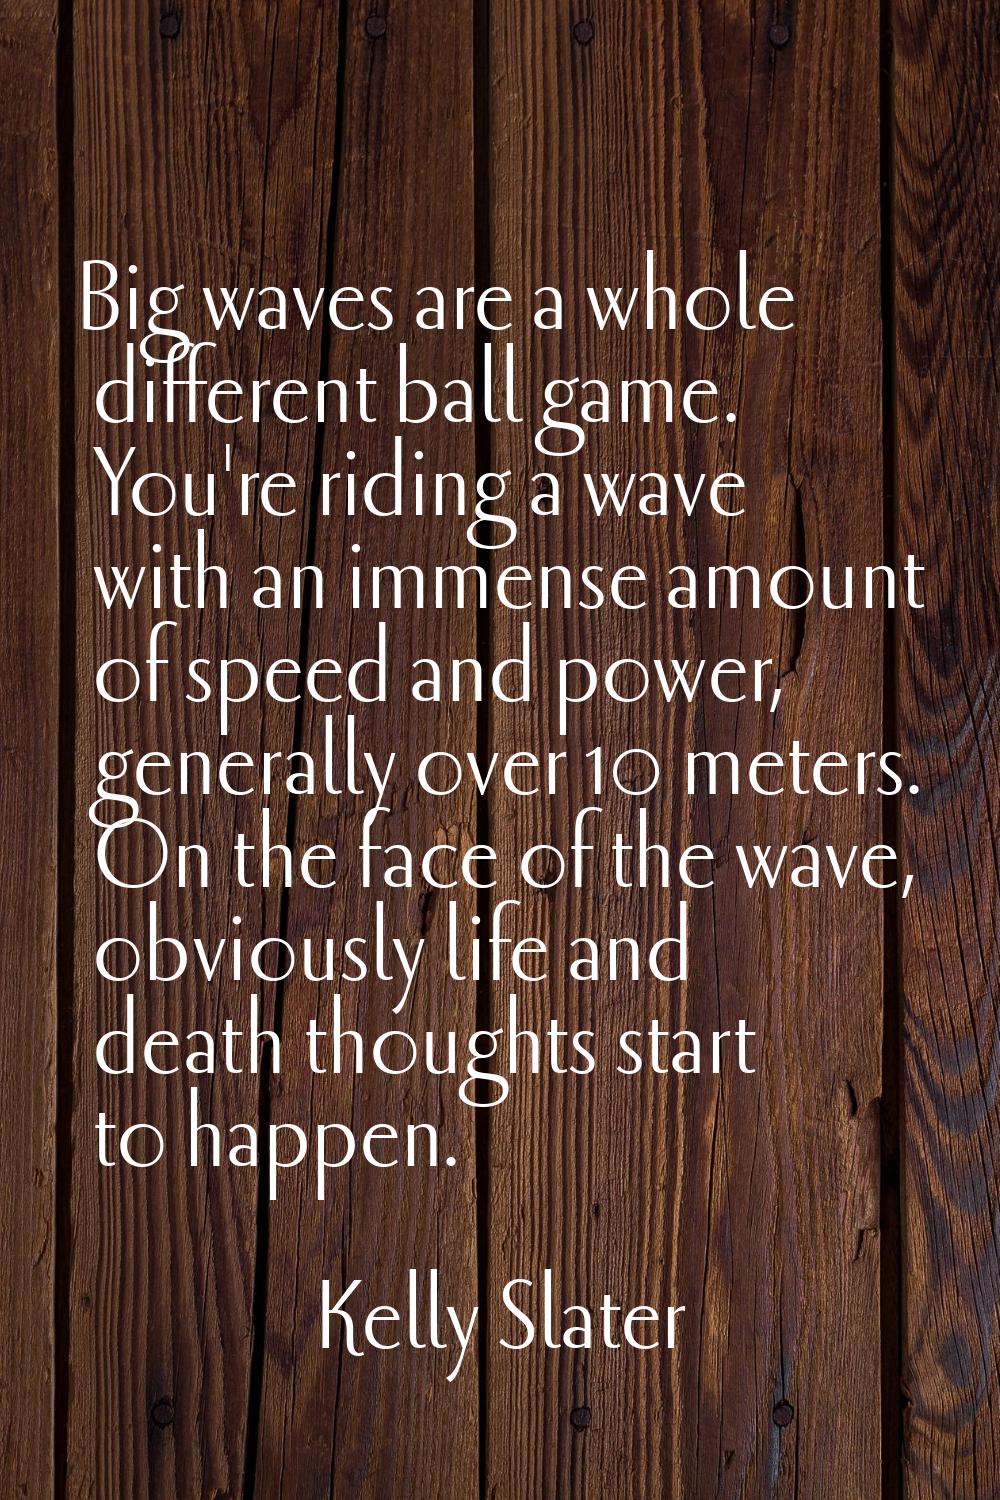 Big waves are a whole different ball game. You're riding a wave with an immense amount of speed and